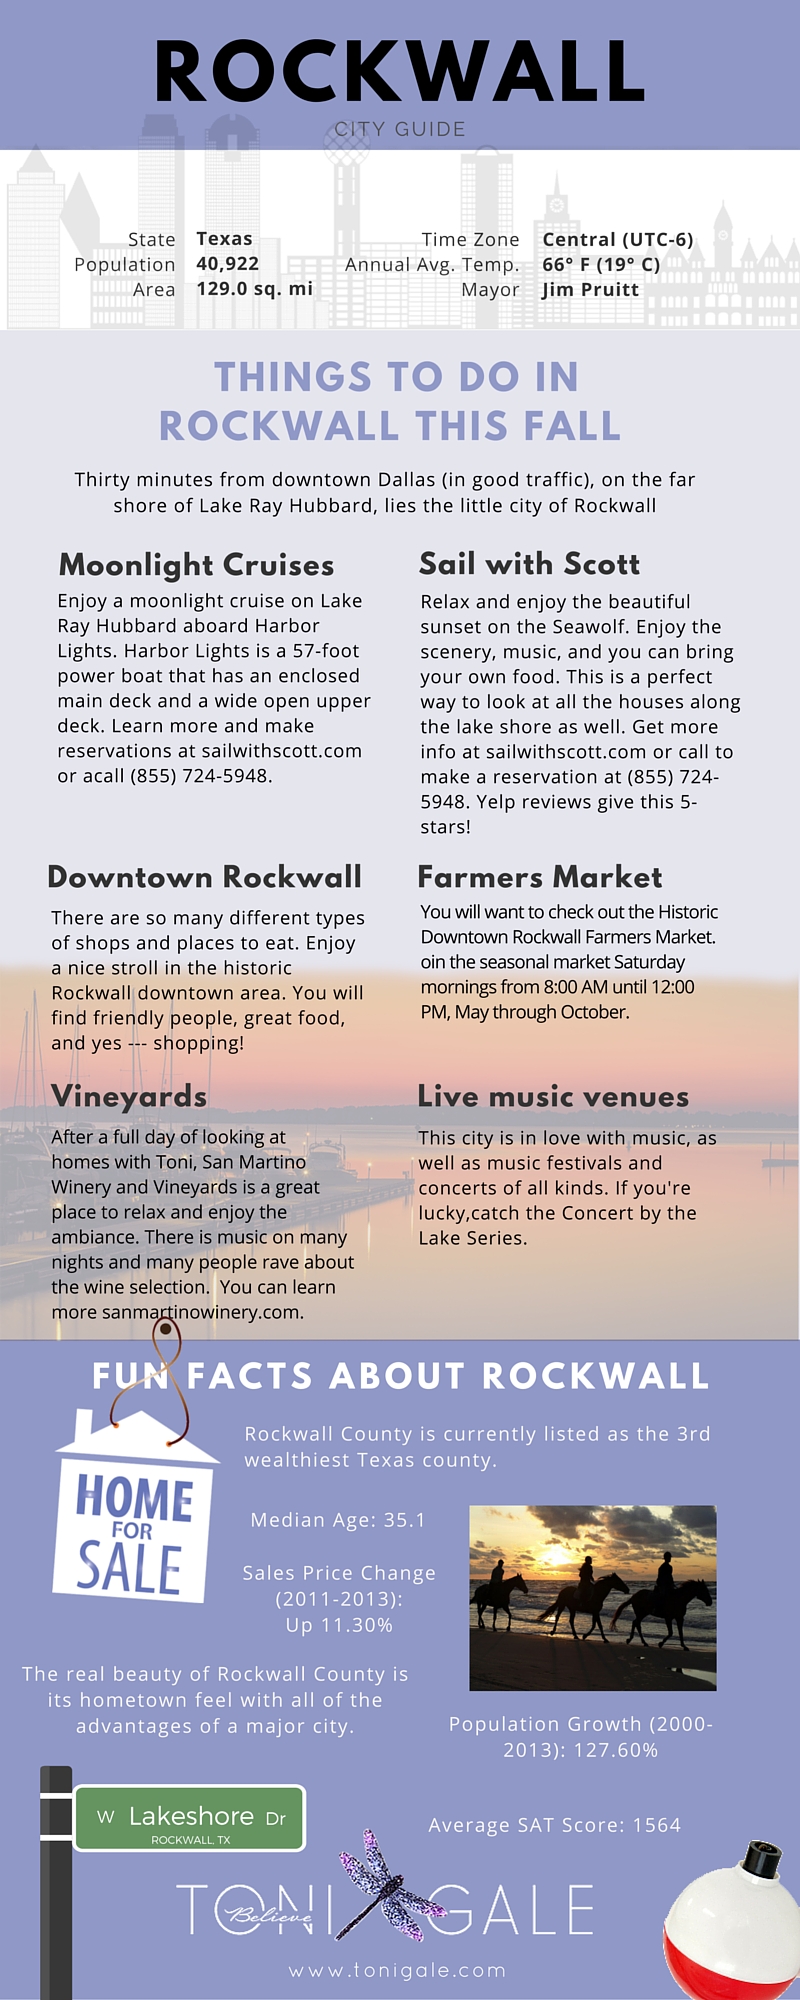 tonigale-rockwall-infographic